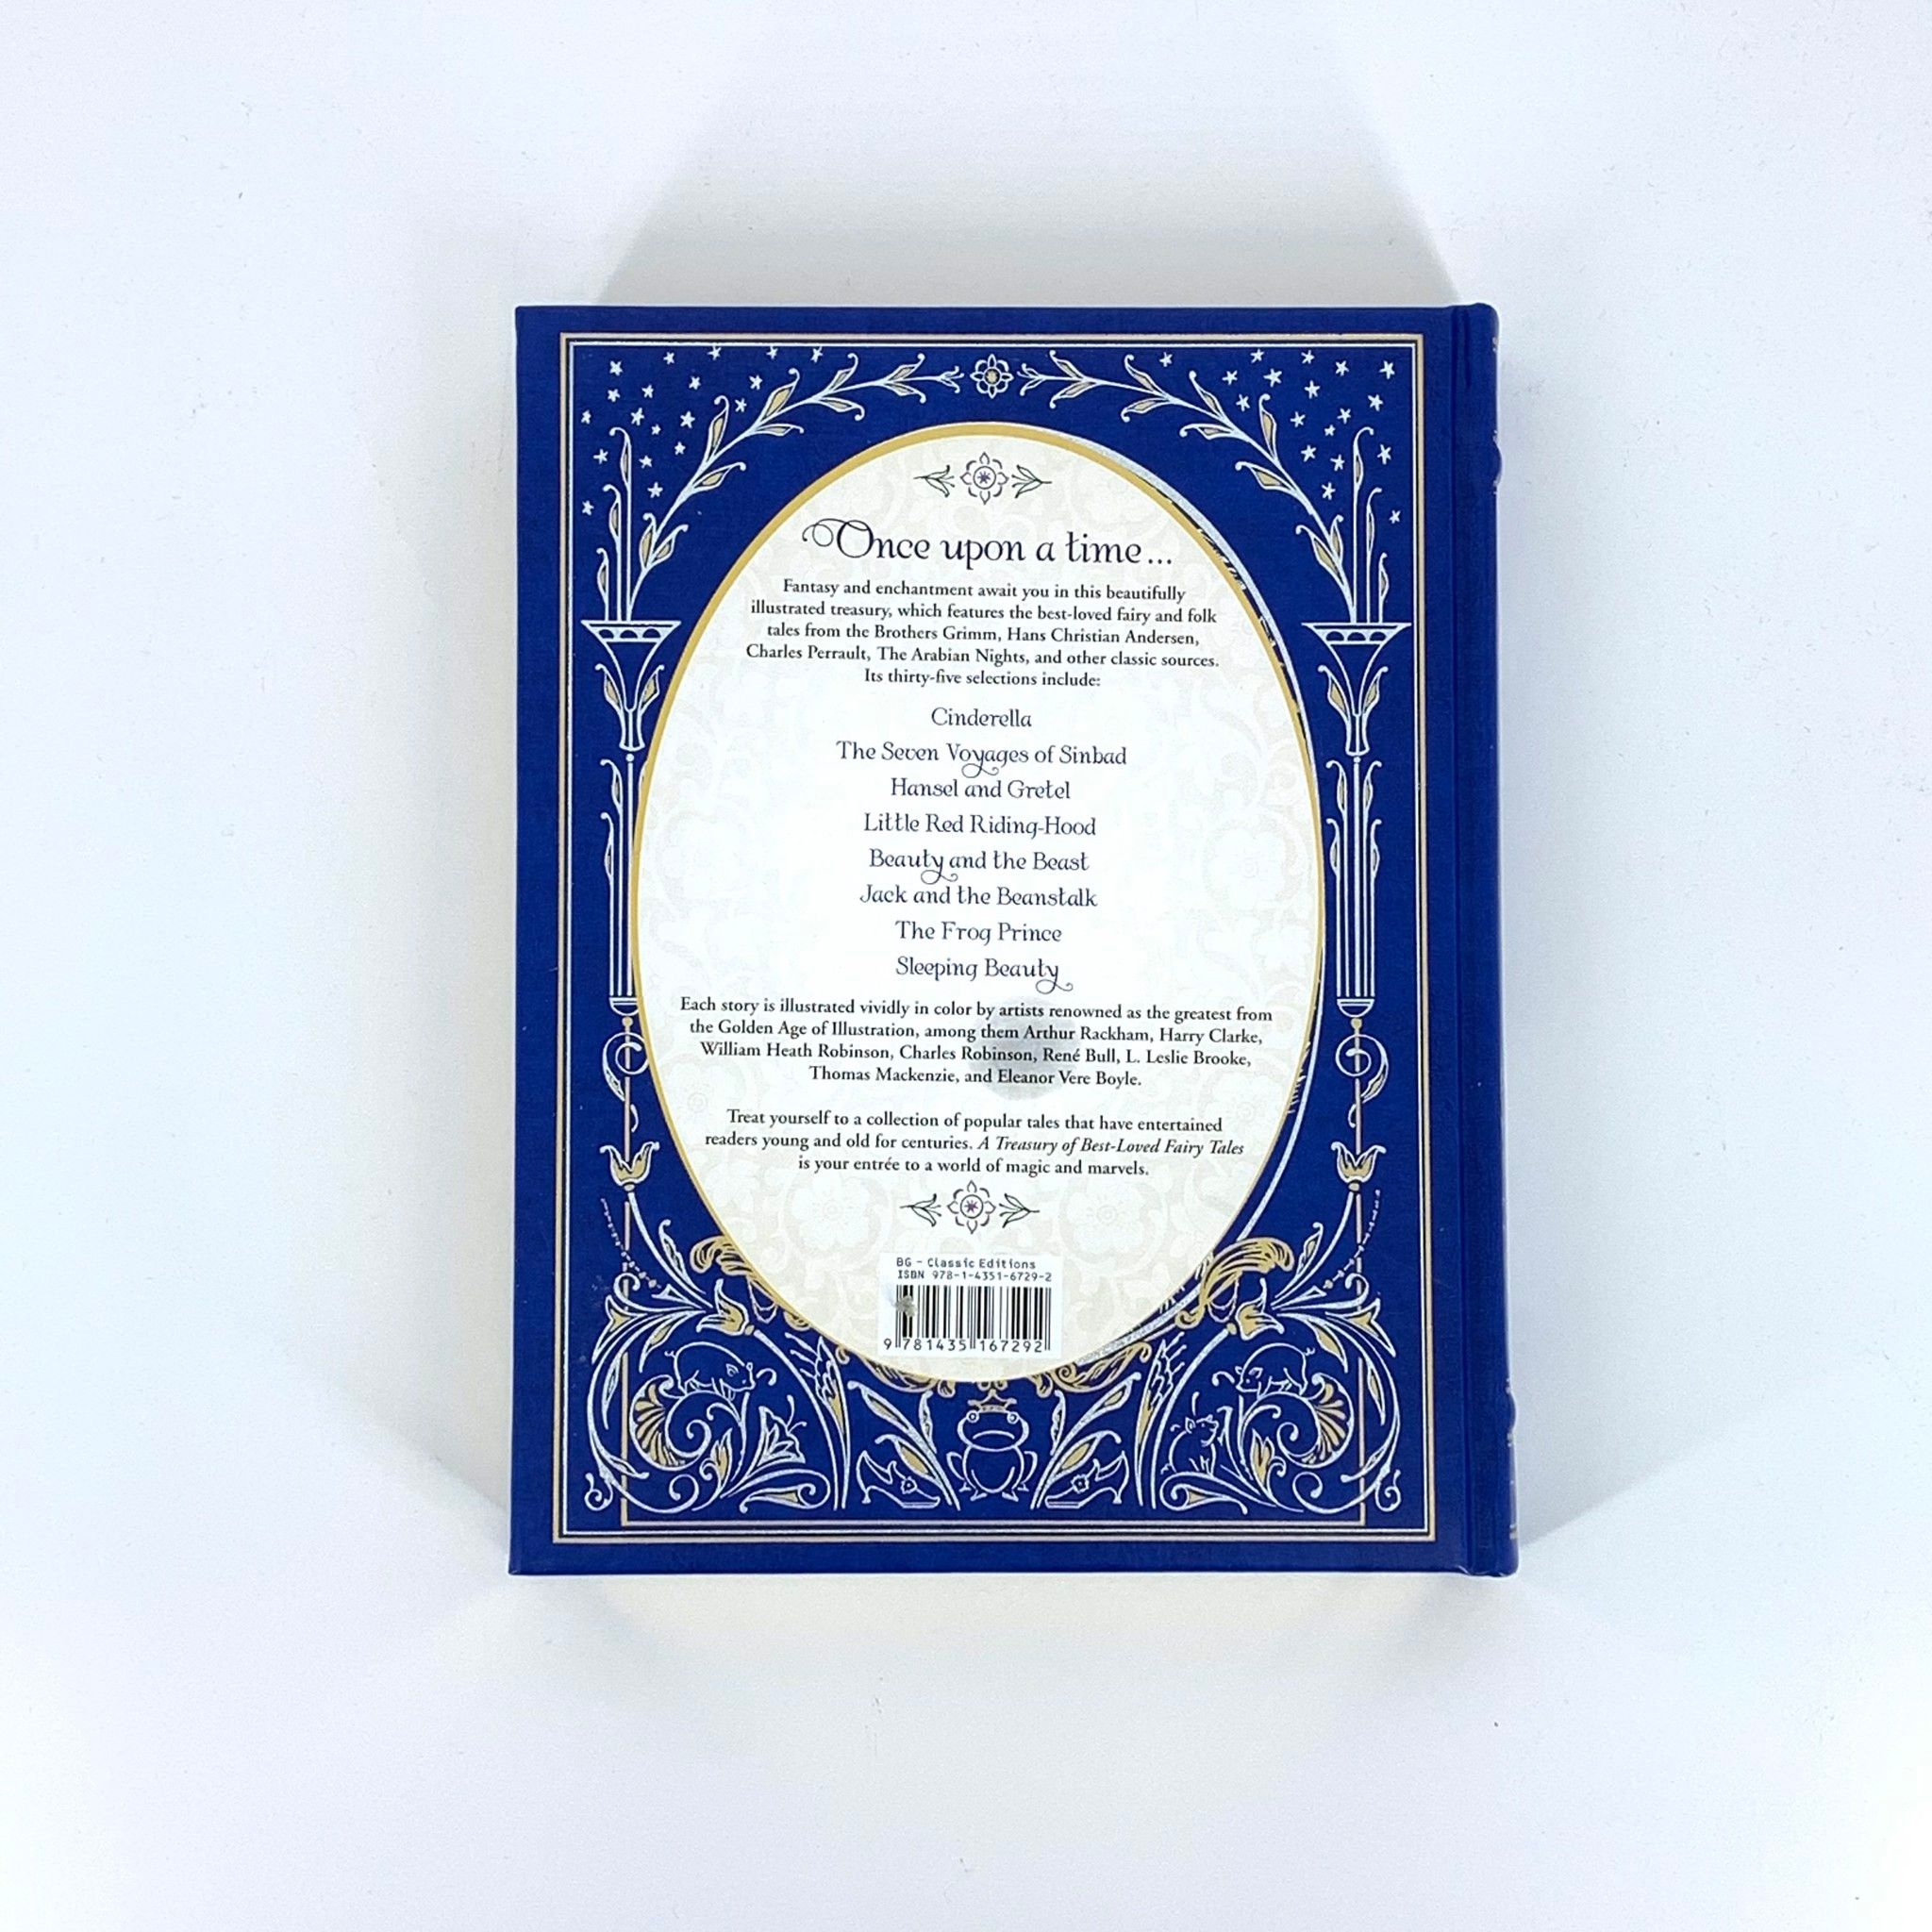  Treasury of Best-loved Fairy Tales, A_Various Authors_9781435167292_Barnes & Noble Inc 